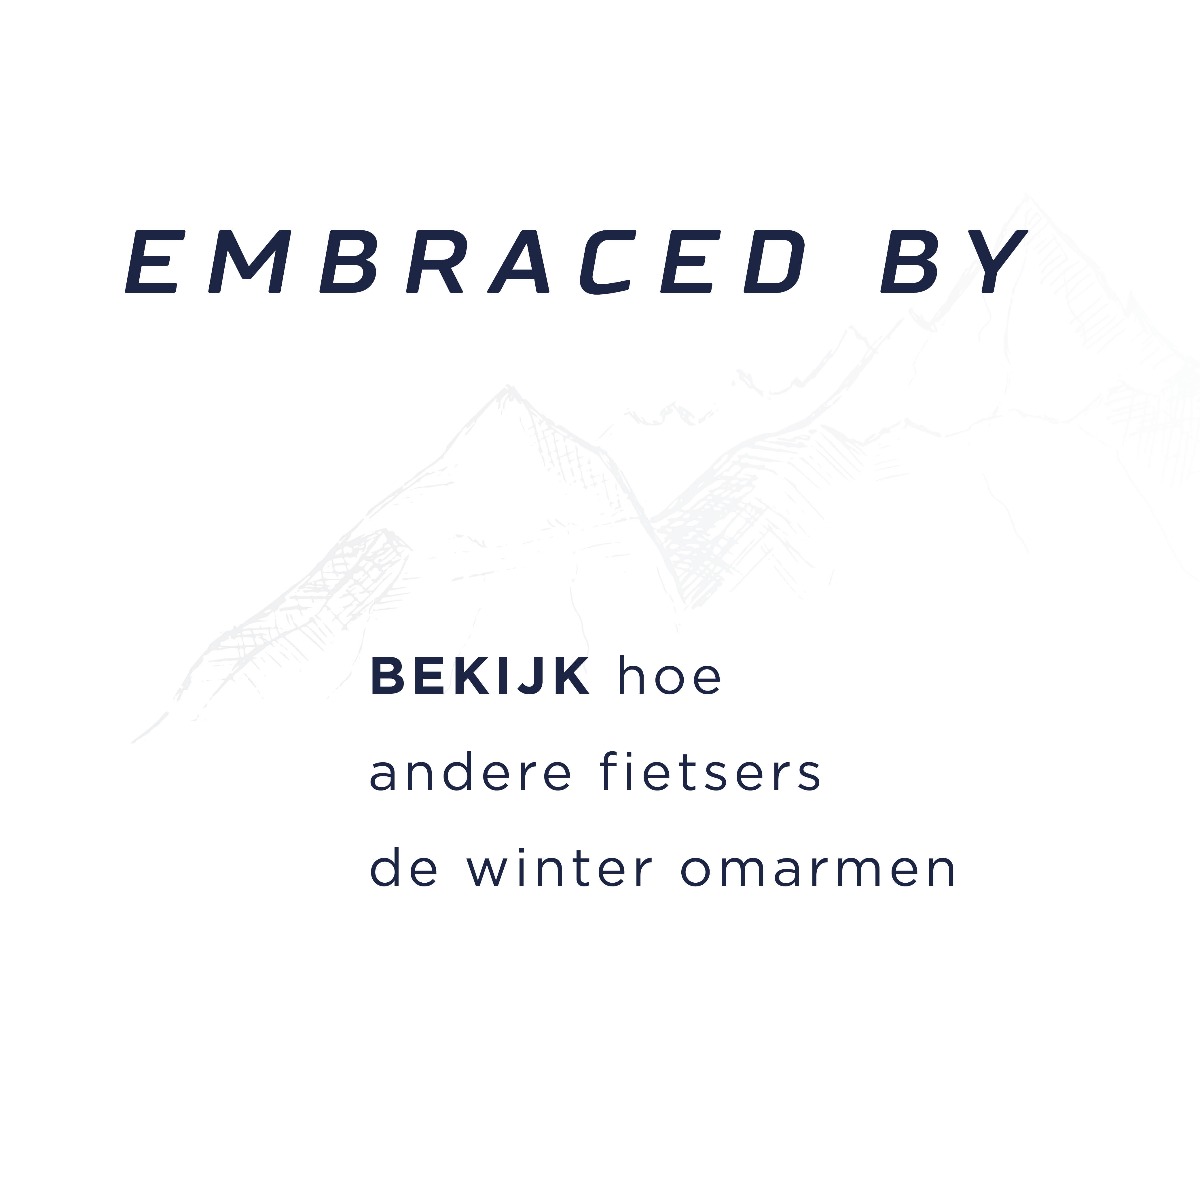 EMBRACED_BY_NL_WEB